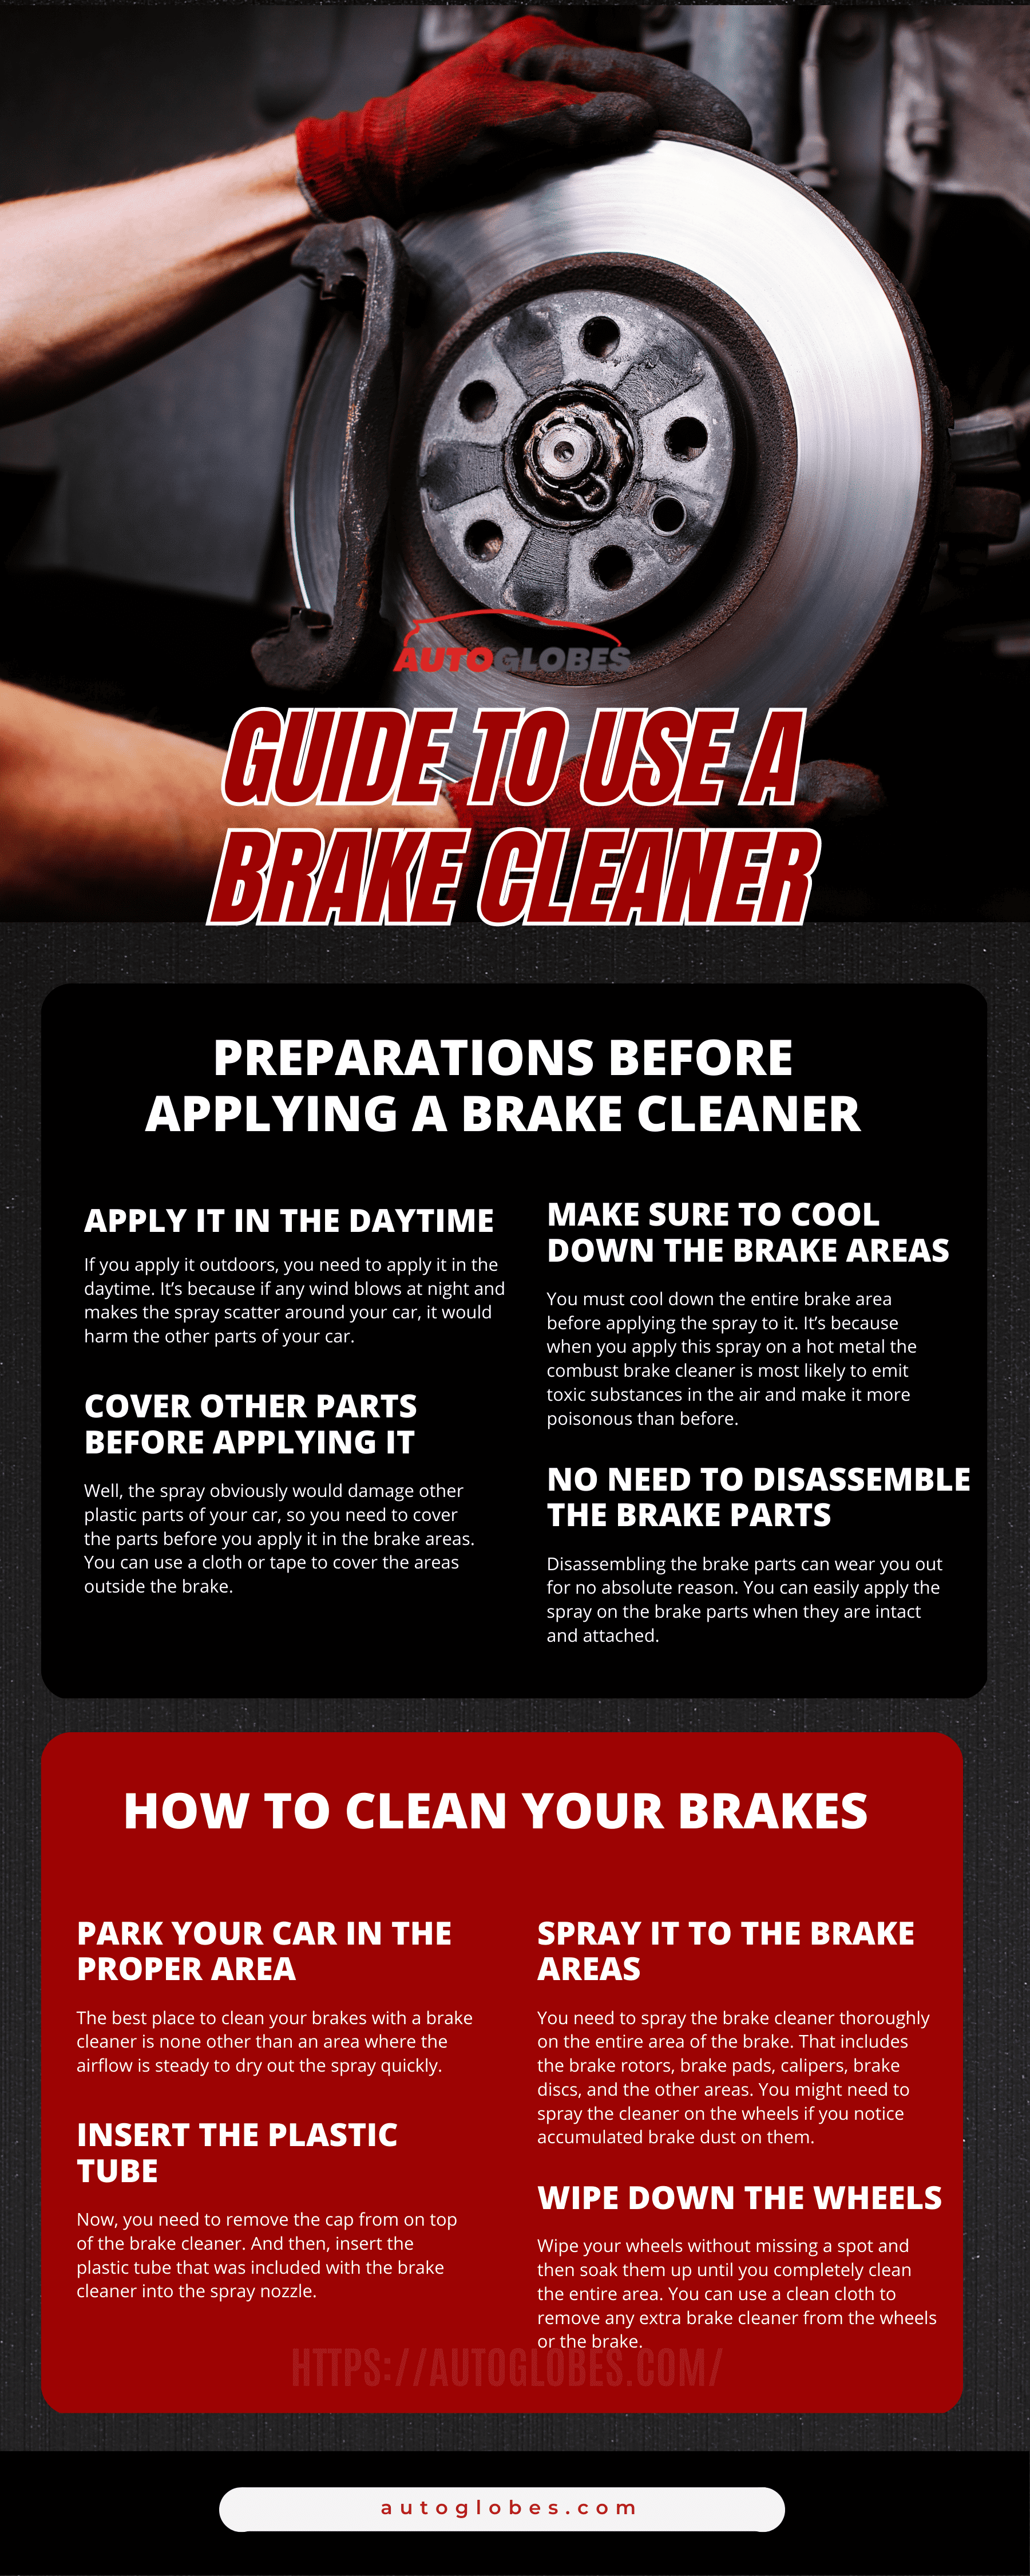 Guide to use a brake cleaner Infographic